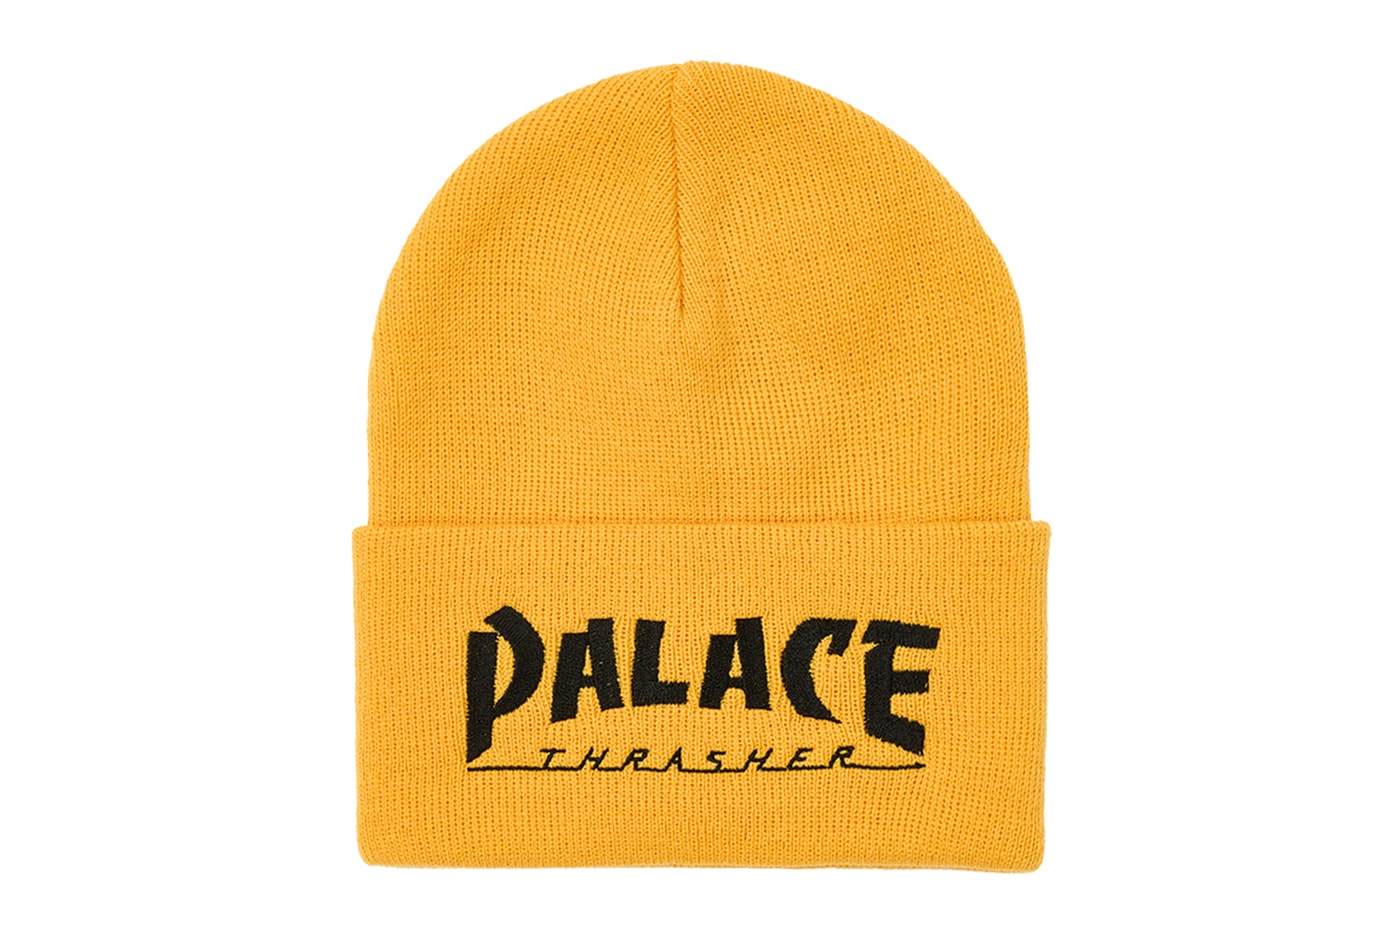 Palace Skateboards Spring Collection Drop 4 Thrasher Collaboration Release Info